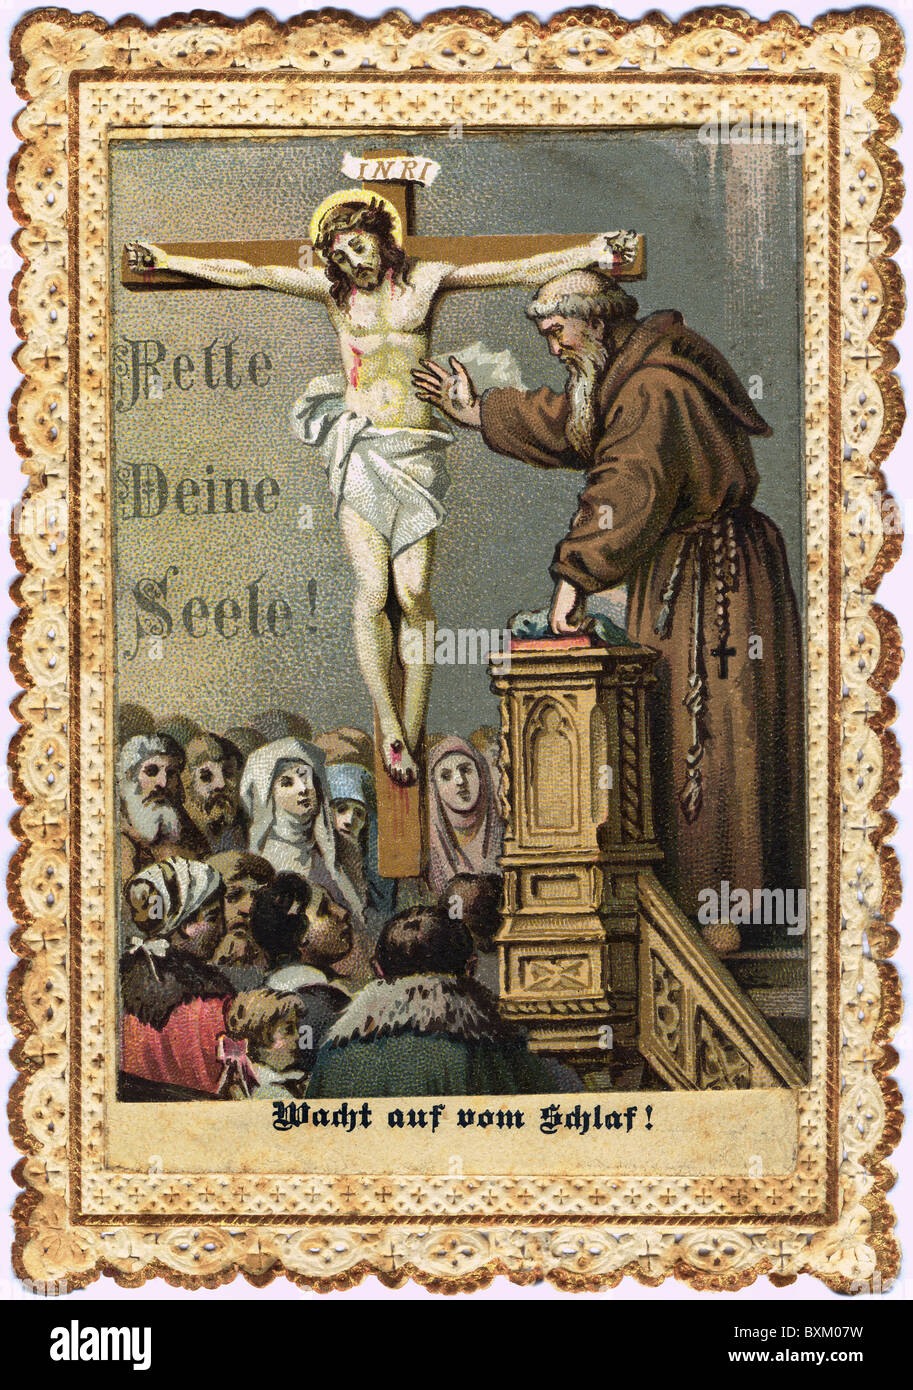 religion, Christianity, "Rette Deine Seele" (rescue your soul), praying note, Germany, circa 1885, Additional-Rights-Clearences-Not Available Stock Photo